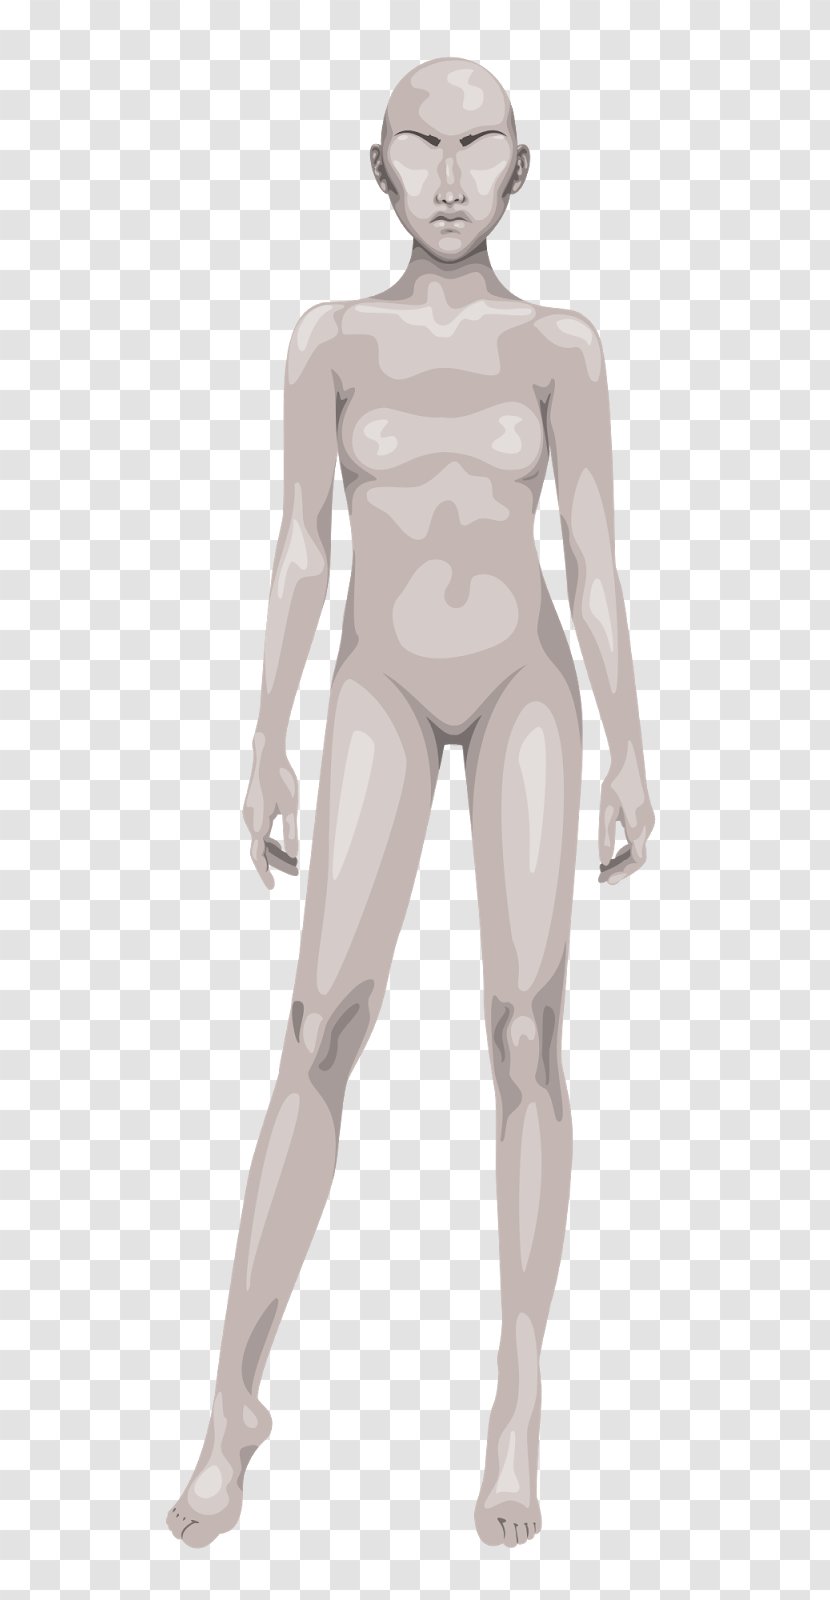 Mannequin Stardoll Project Cycle Management Imgur - Cartoon - Tasty Style Transparent PNG